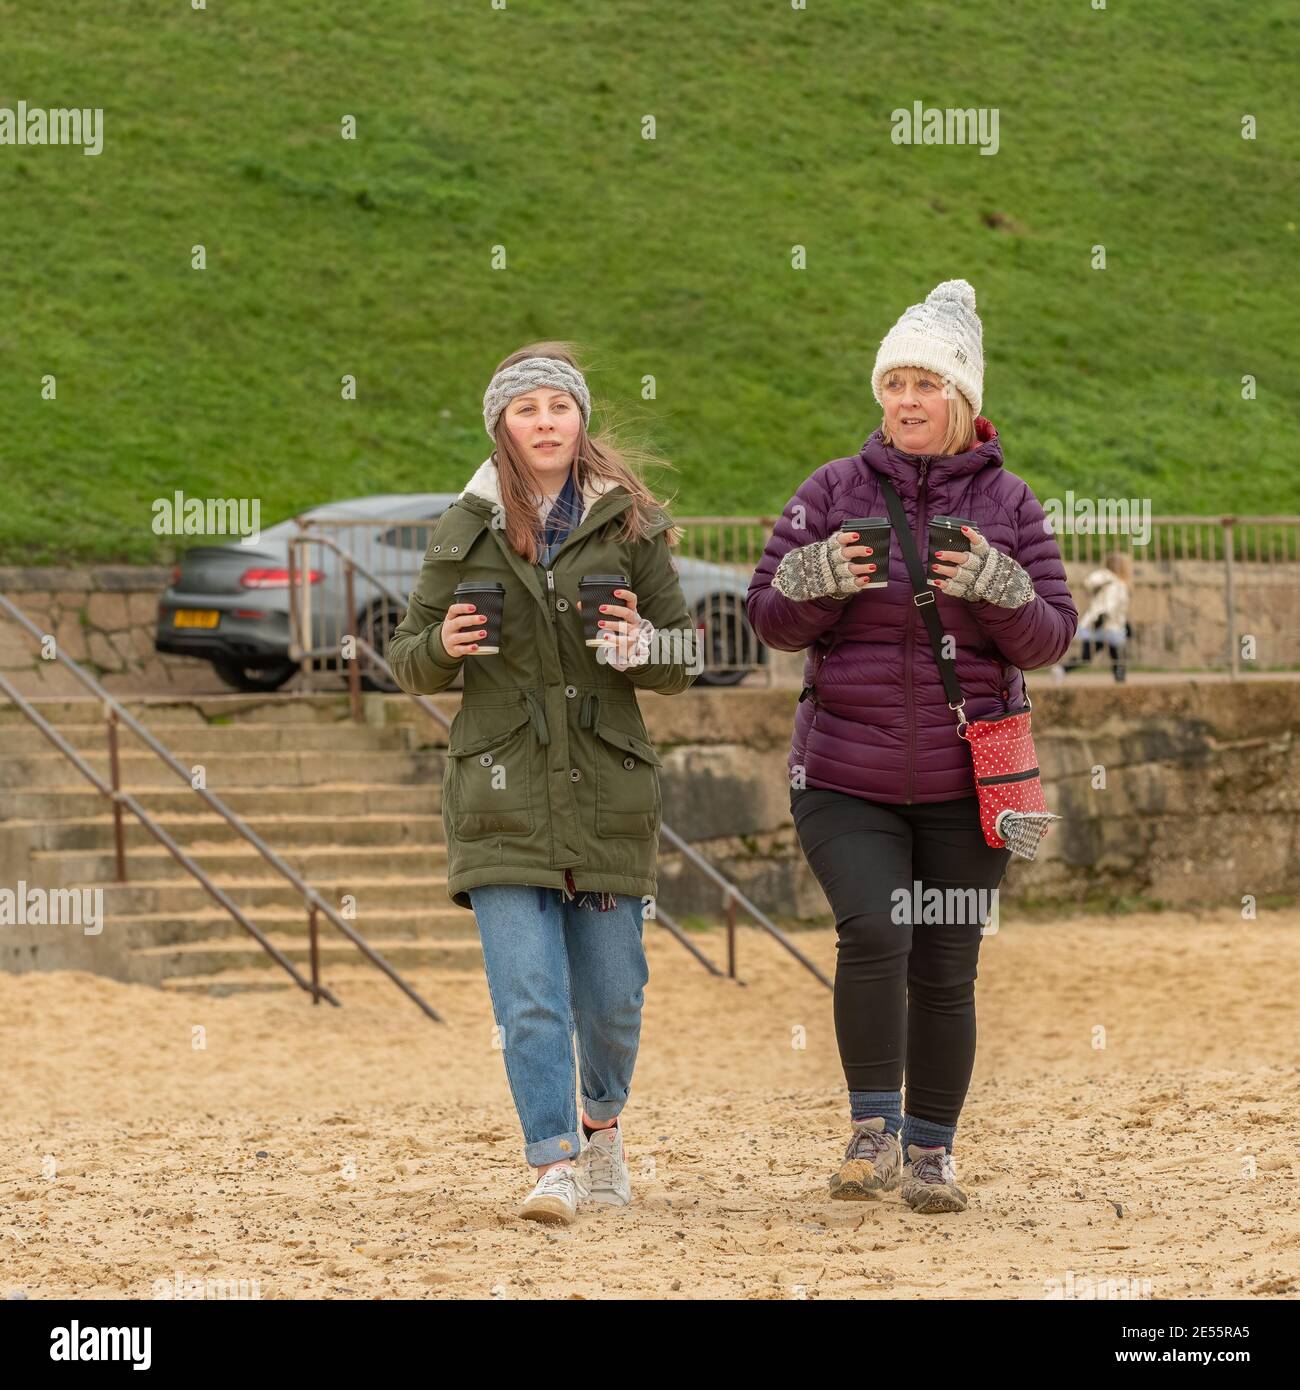 Young woman (20s) and older woman (50s) dressed for the cold carry four cups of coffee over sand beach towards the camera. Stock Photo